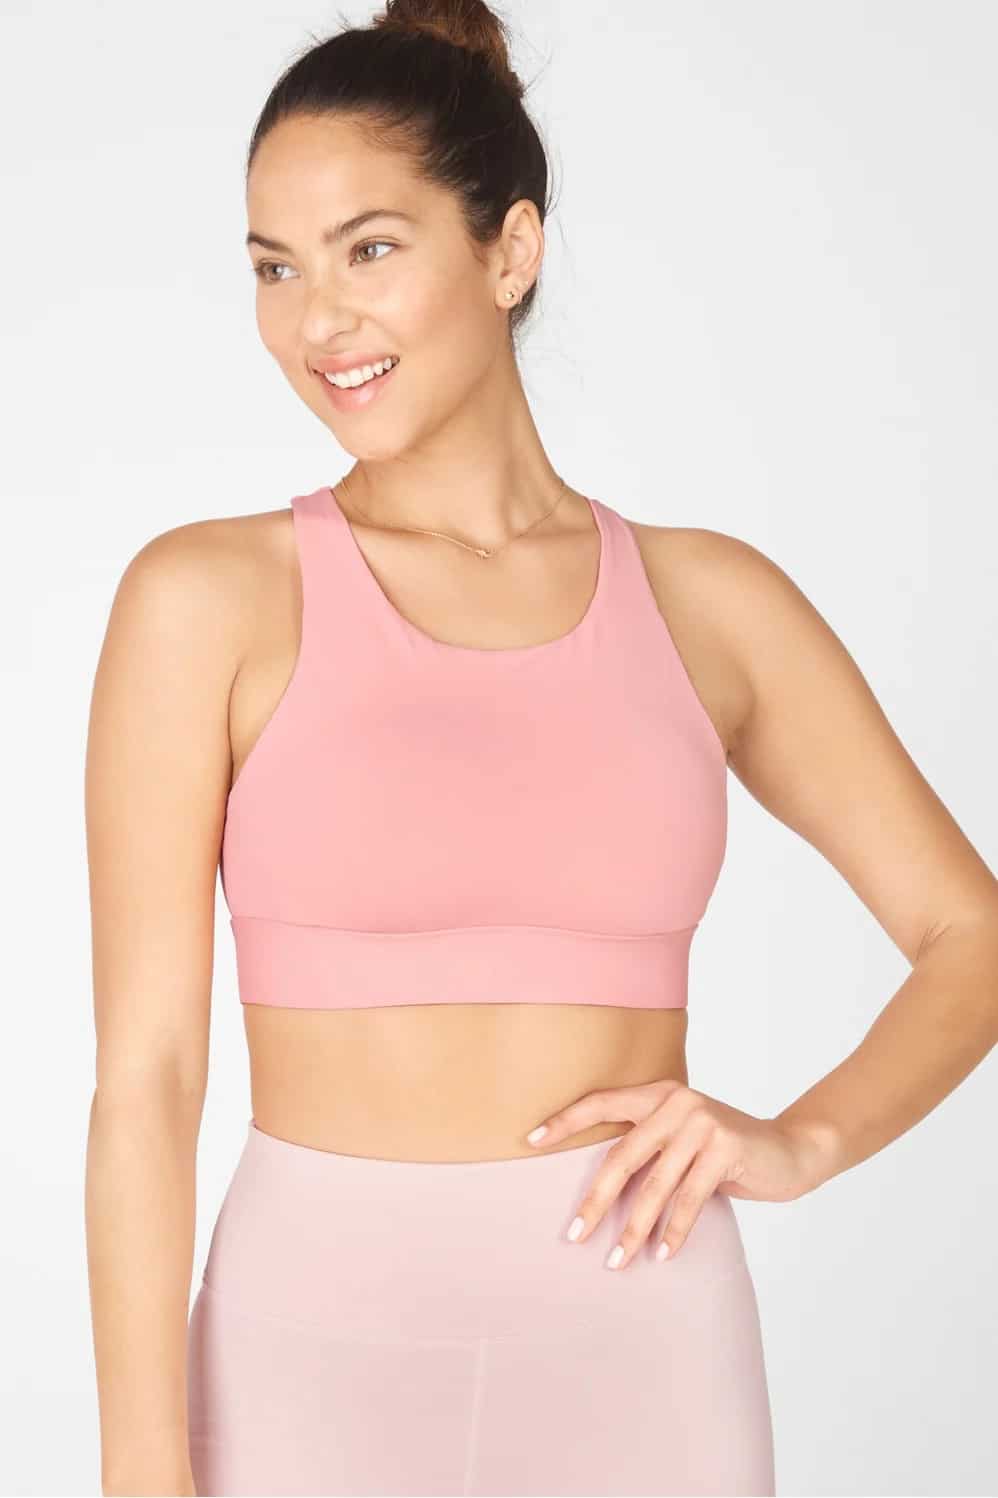 No-Bounce High-Impact Sports Bra from Fabletics